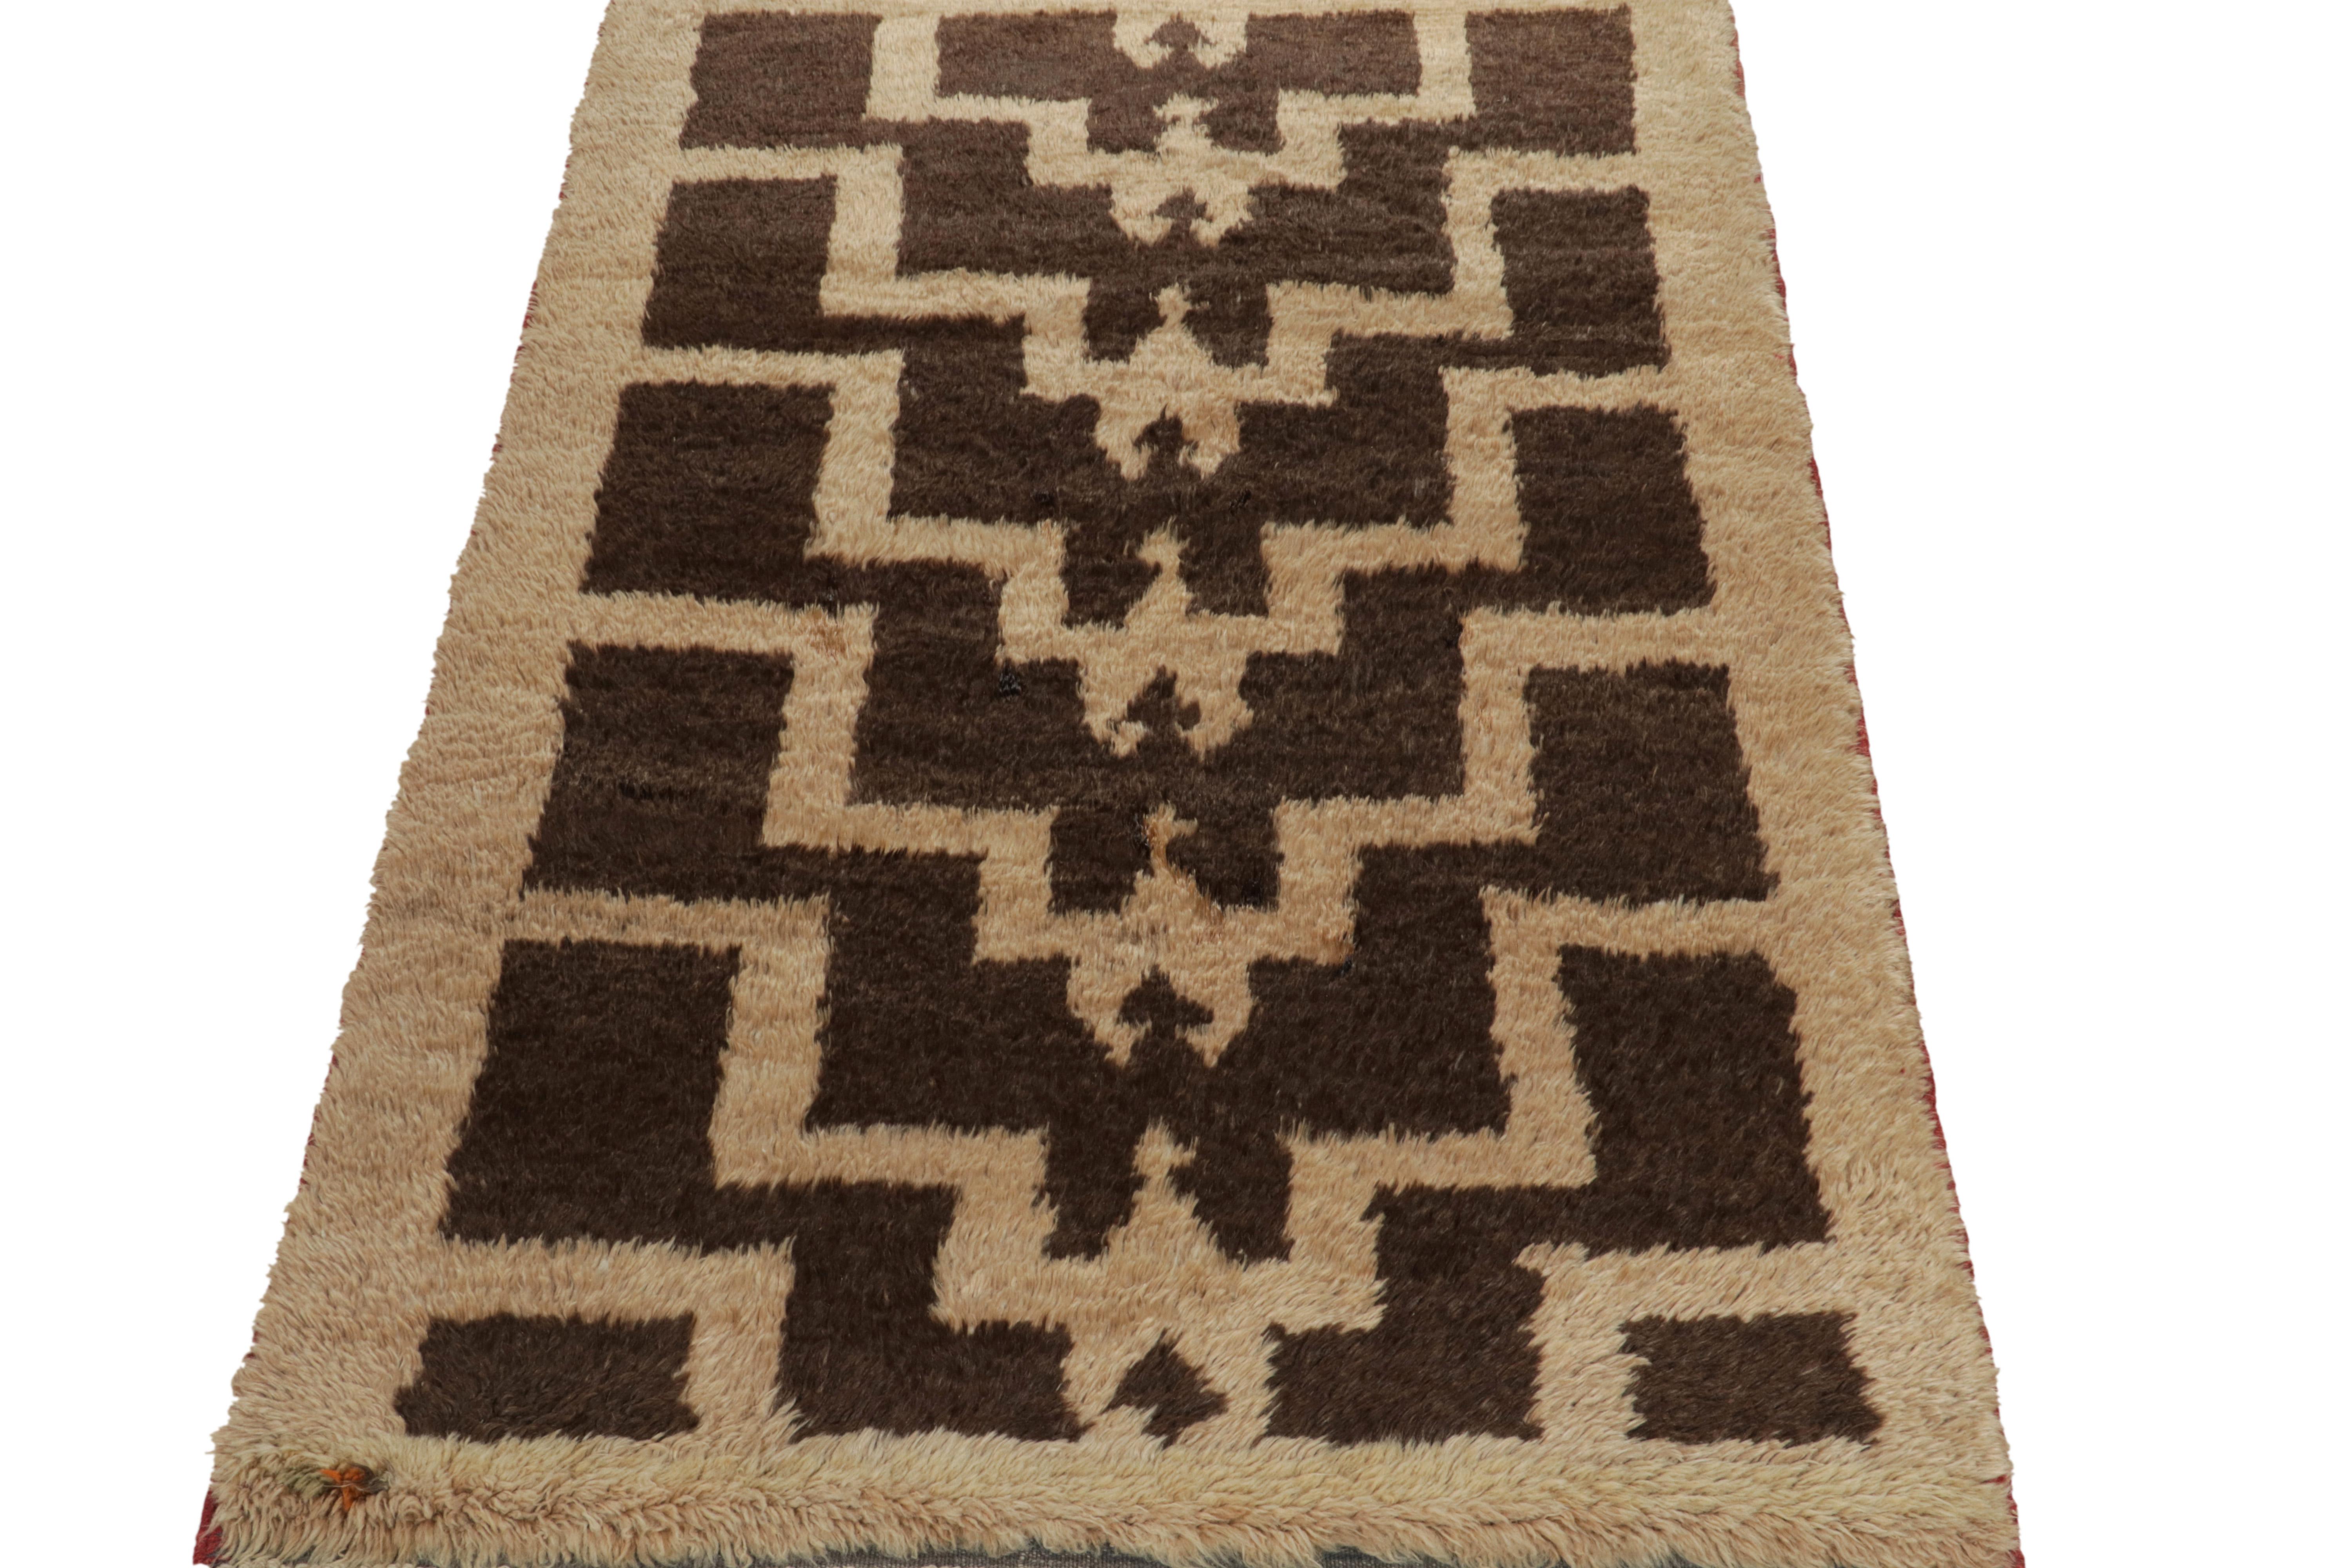 A vintage 3x5 Tulu rug from Turkey entering Rug & Kilim’s most prominent, newly added tribal collection. The piece is hand-knotted in a fine shag pile with high low texturability on the border for enhancing the appeal of the rectilinear geometric